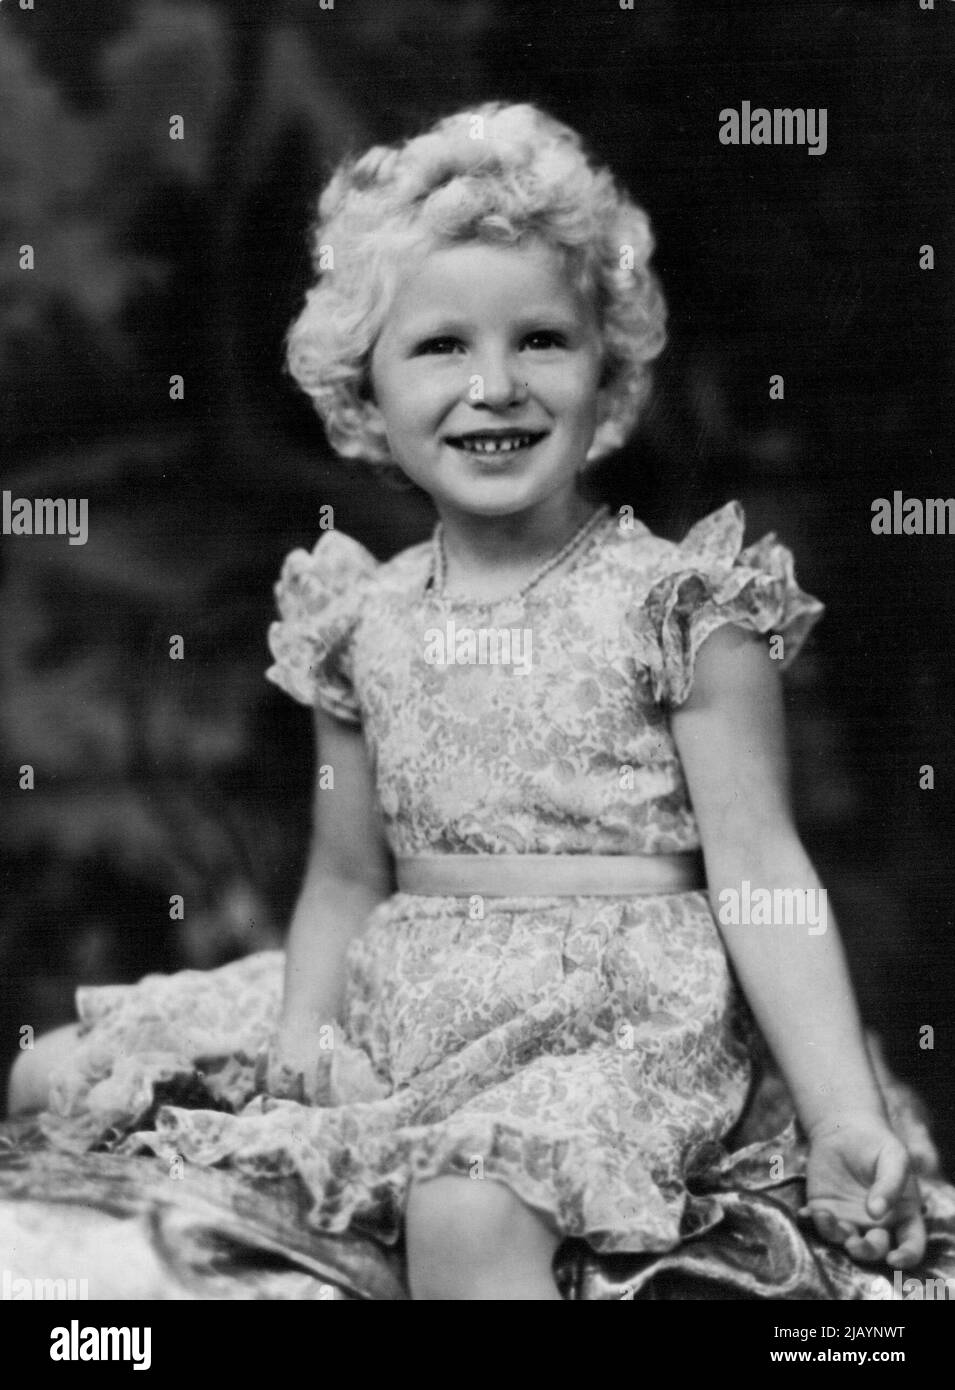 Picture of Princess Anne taken specially for the occasion of her fourth birthday by Marcus Adams. She is wearing a frock of figured voils over taffeta with a pink coral and pearl necklace. Princess Anne is four today - and this afternoon young guests joined the Princess and her brother, Prince Charles, at a birthday tea-party at Balmoral Castle. A special iced sponge-cake has been made by Mr. Ronald Aubrey, the Royal chef. The Royal Children today accompanied the Queen to a service in Craithie Church near Balmoral castle. It was the first time that Princess Anne had attended a service in the c Stock Photo